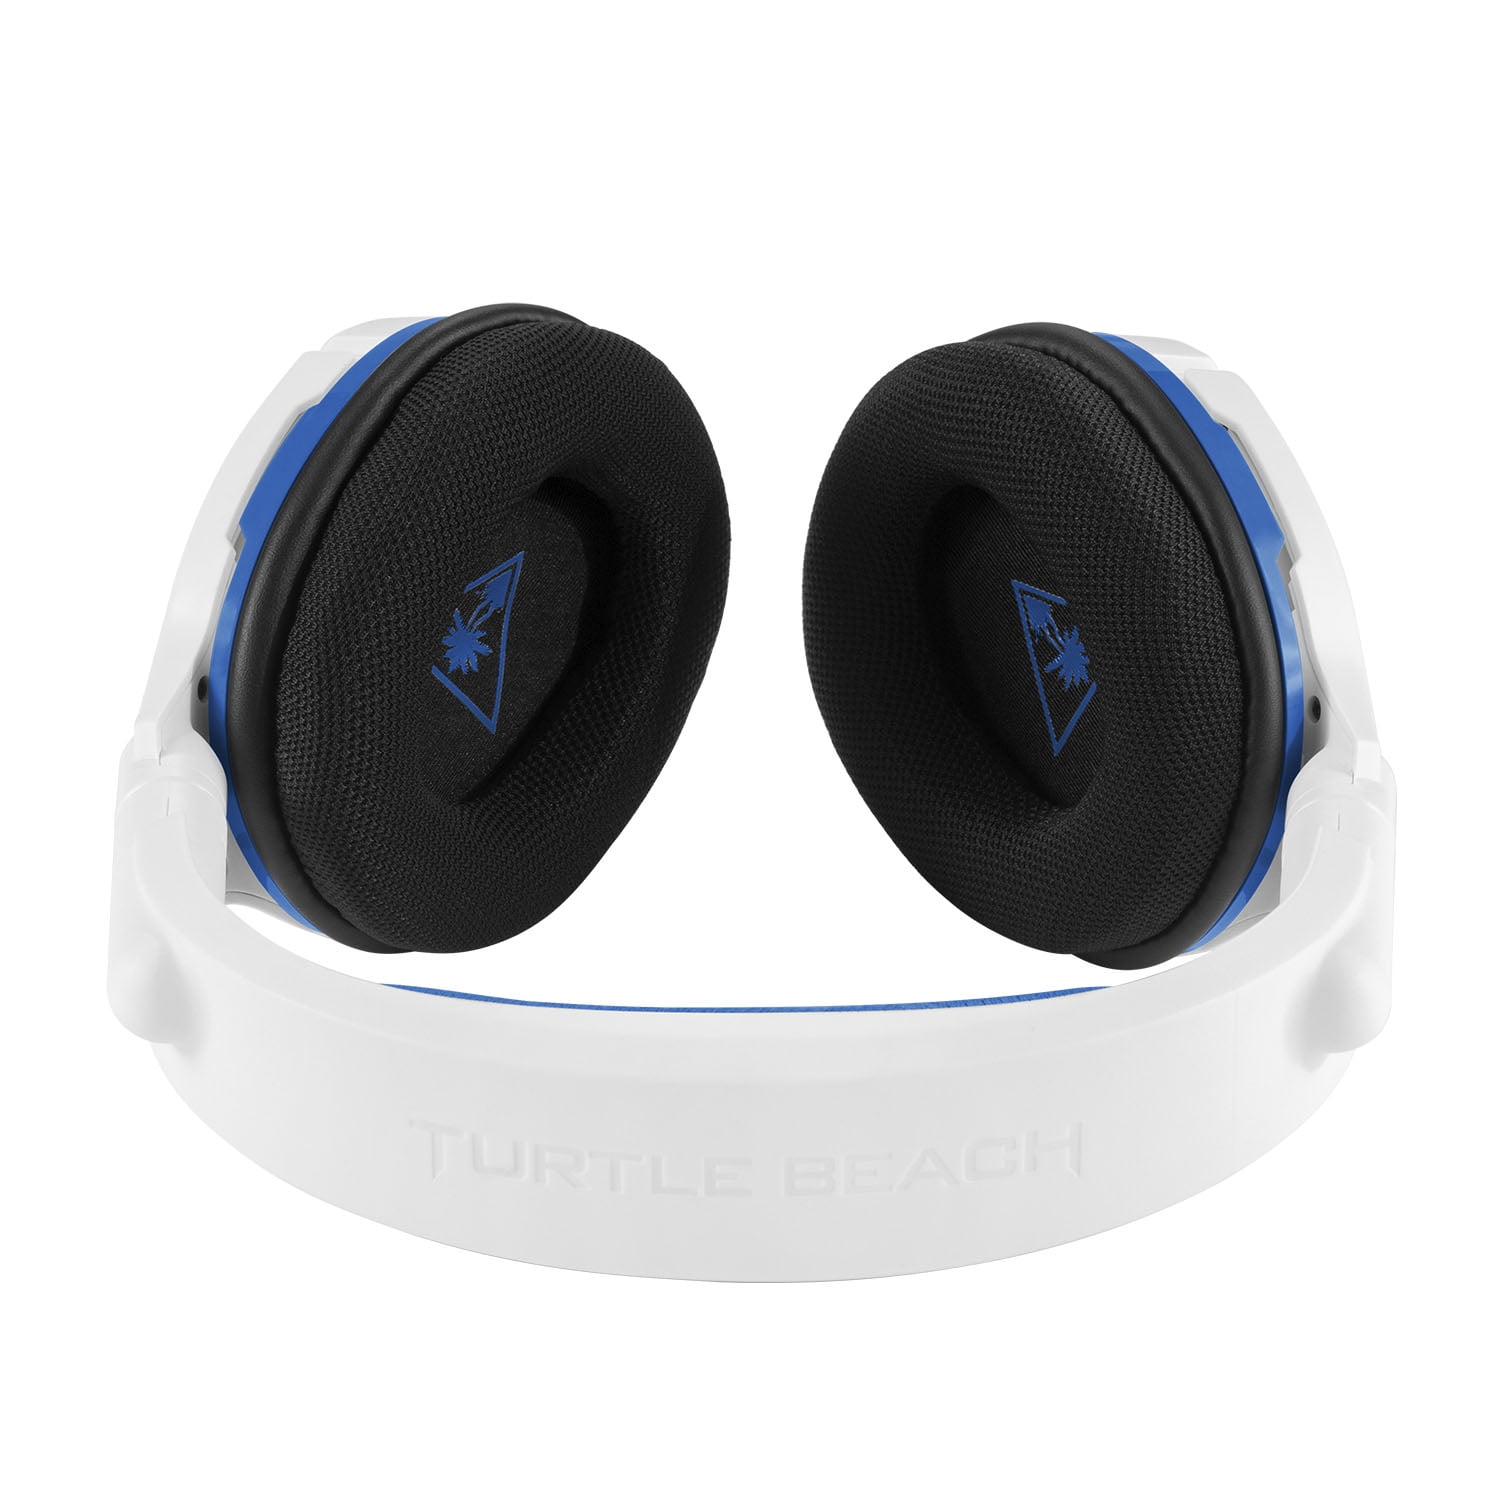 erosie Email roekeloos Turtle Beach Stealth 600 Wireless Gaming Headset for PS4, PC (White) -  Walmart.com